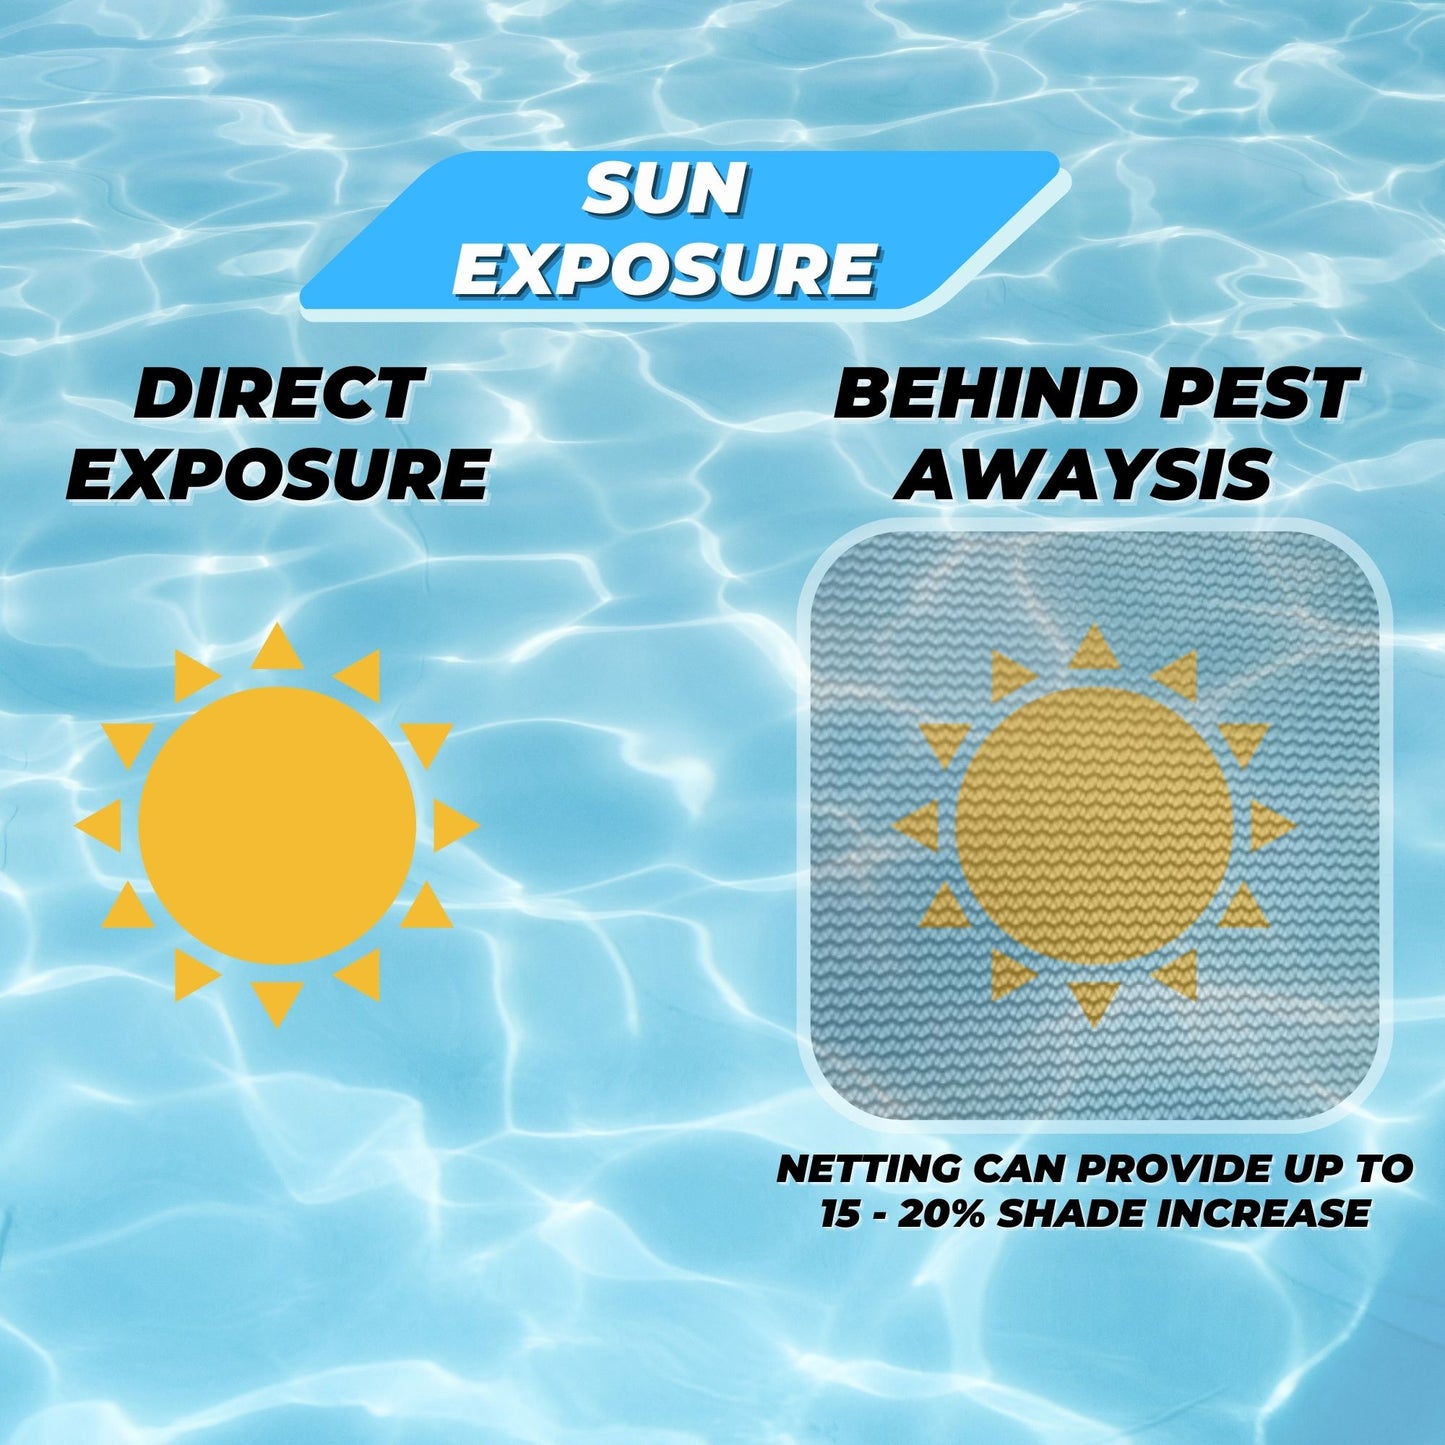 Pest Awaysis provides 15-20% increase in shade protecting you from direct sun exposure